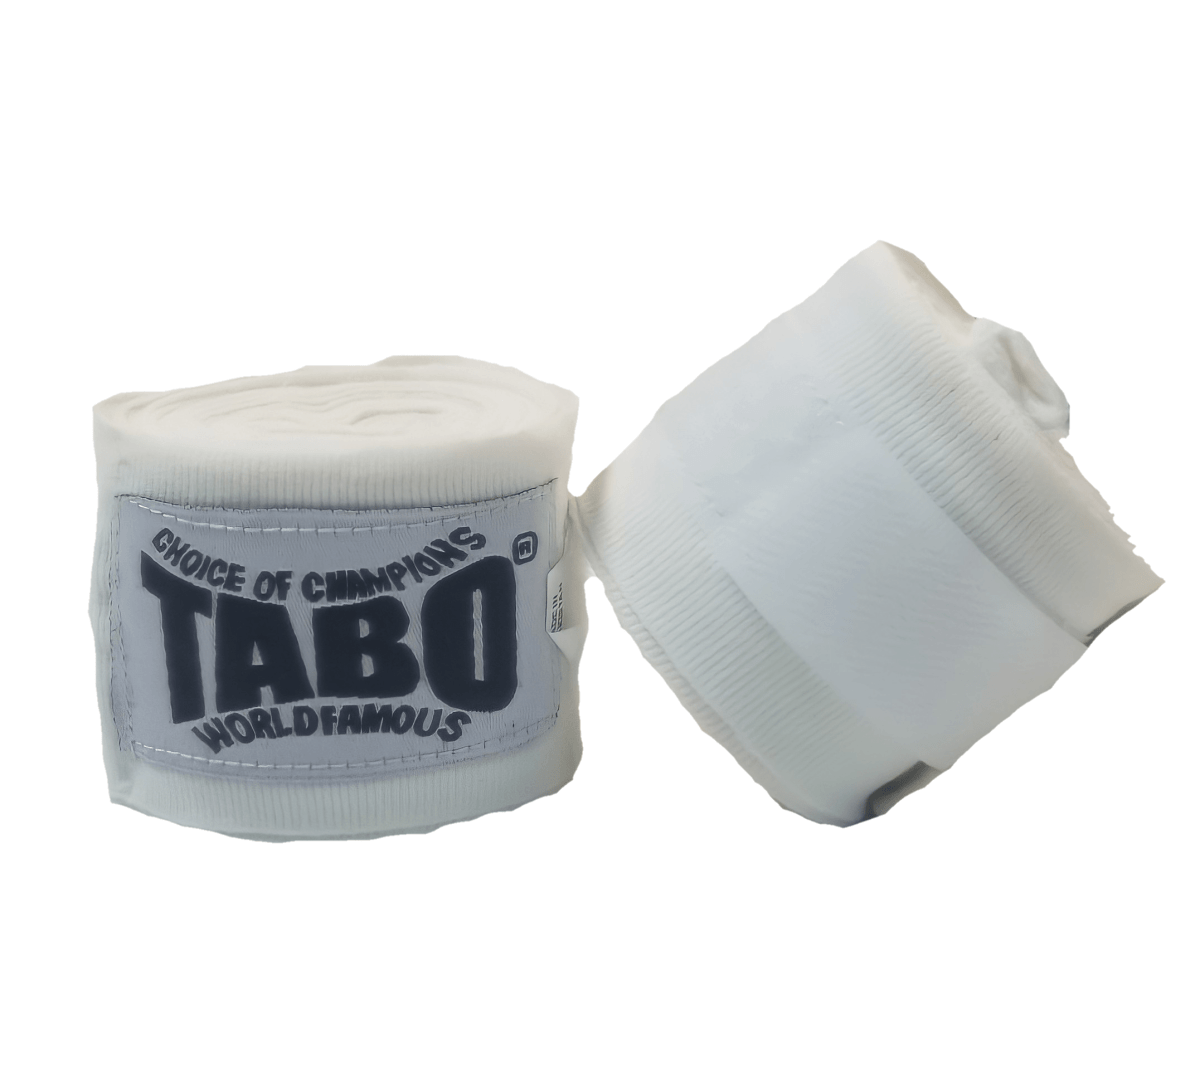 1640526102637 E1640527490548 &Amp;Lt;H1&Amp;Gt;Tabo Boxing Bandage - White&Amp;Lt;/H1&Amp;Gt; &Amp;Lt;Span Class=&Amp;Quot;A-List-Item&Amp;Quot;&Amp;Gt;These Are The Most Used Wrist Wraps Boxing. Simply Hook Your Thumb Into The Attached Loop And Wrap Your Hands. Then Secure Them With The Built-In And You’re Good To Go &Amp;Lt;/Span&Amp;Gt;&Amp;Lt;Span Class=&Amp;Quot;A-List-Item&Amp;Quot;&Amp;Gt;There’s A Reason Professionals Only Use Boxing Wrist Wraps With No Gel And Prefer The Original Wraps For Boxing Gloves. Too Much Cushioning &Amp;Amp; Stretch Will Defeat The Purpose Of Protection, Give You Too Much Wiggle Room And Eventually Lead To Injuries. That’s Why We Don’t Compromise And Stick With What Works Best. &Amp;Lt;/Span&Amp;Gt;&Amp;Lt;Span Class=&Amp;Quot;A-List-Item&Amp;Quot;&Amp;Gt;High Quality Materials Don’t Just Increase A Products Lifetime But Also Leads To Happy Customers With Healthy Hands Boxing Men &Amp;Amp; Women May Slowly Degrade Without You Even Noticing It Before It Is Too Late&Amp;Lt;/Span&Amp;Gt; Boxing Bandage Tabo Boxing Bandage - White